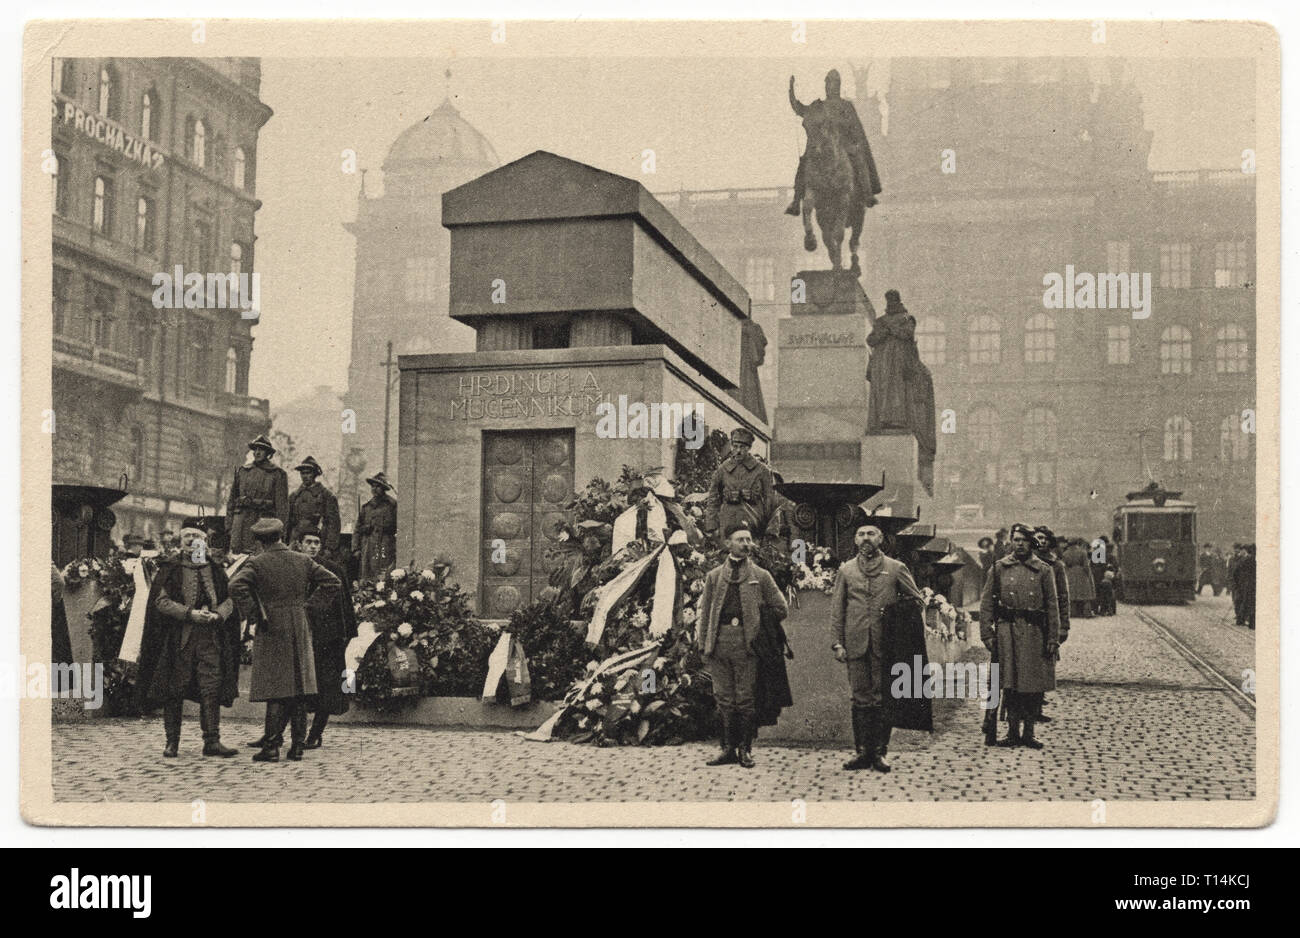 Memorial to the fallen soldiers of the Czechoslovak Legions temporary installed in front of the Statue of Saint Wenceslas in Wenceslas Square (Václavské náměstí) in Prague, Czechoslovakia, and unveiled in occasion of the first anniversary of the independence of Czechoslovakia on 27 October 1919. Czechoslovak vintage postcard issued in 1928. Courtesy of the Azoor Postcard Collection. Stock Photo